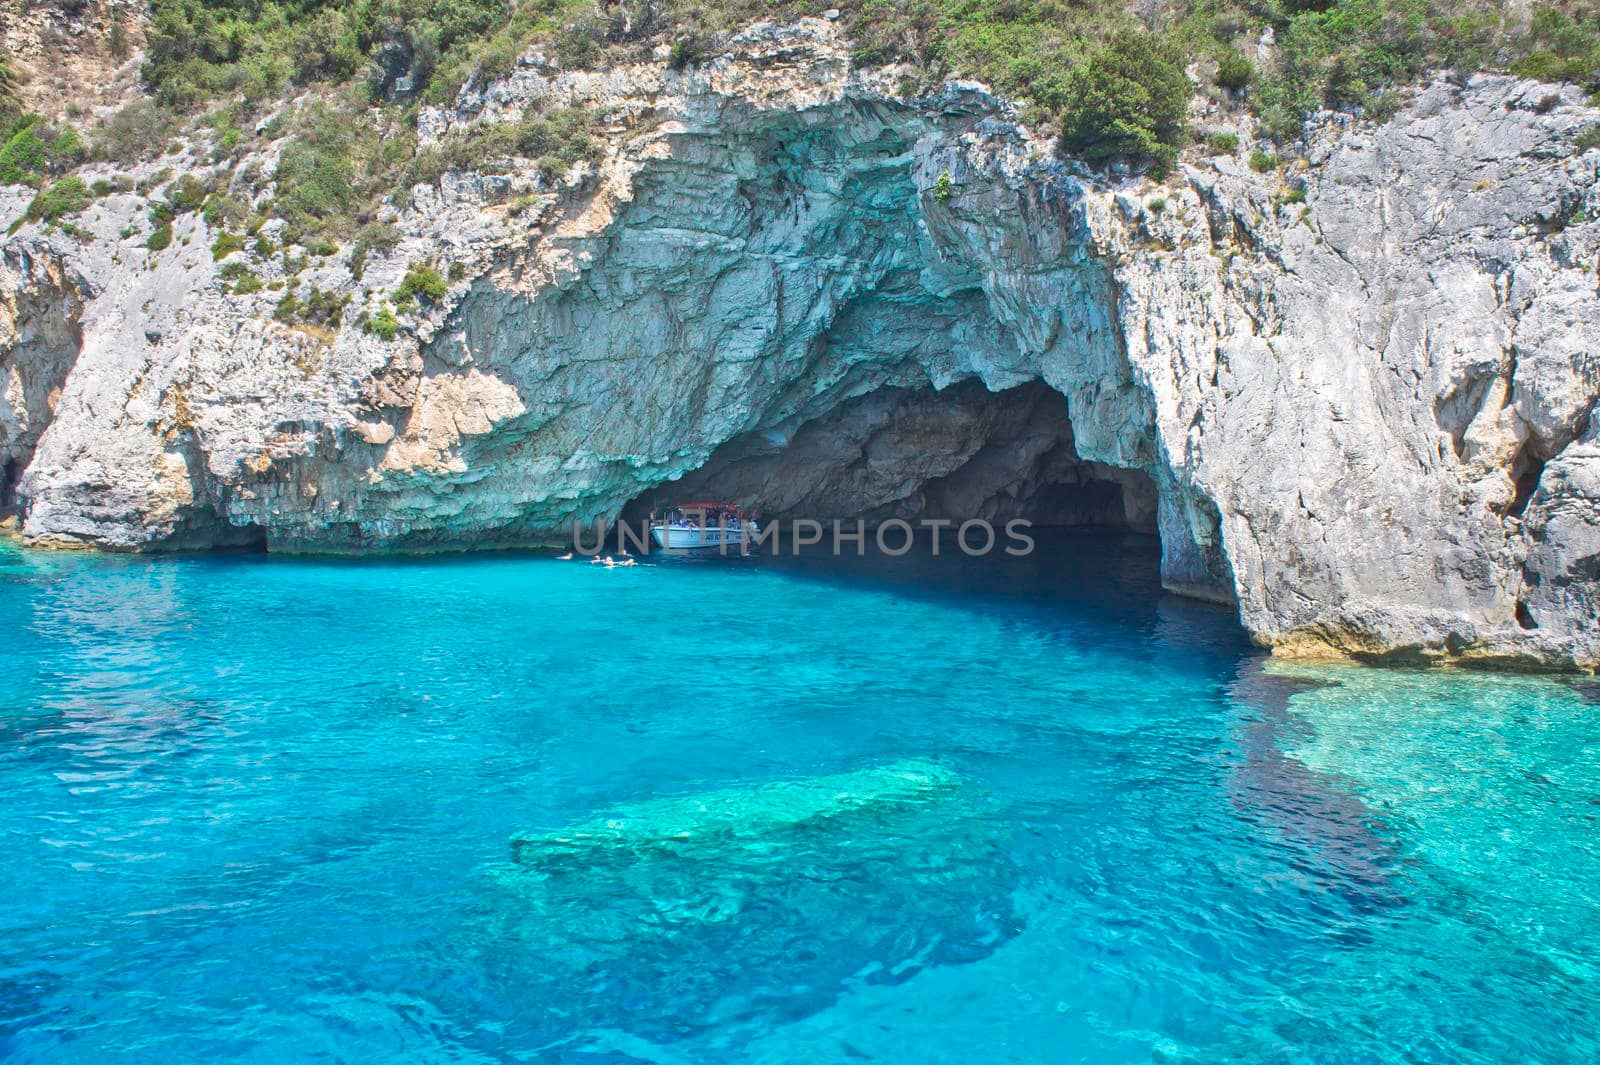 Paxos Island, Sea cave view from a tourist boat, Greece, Europe